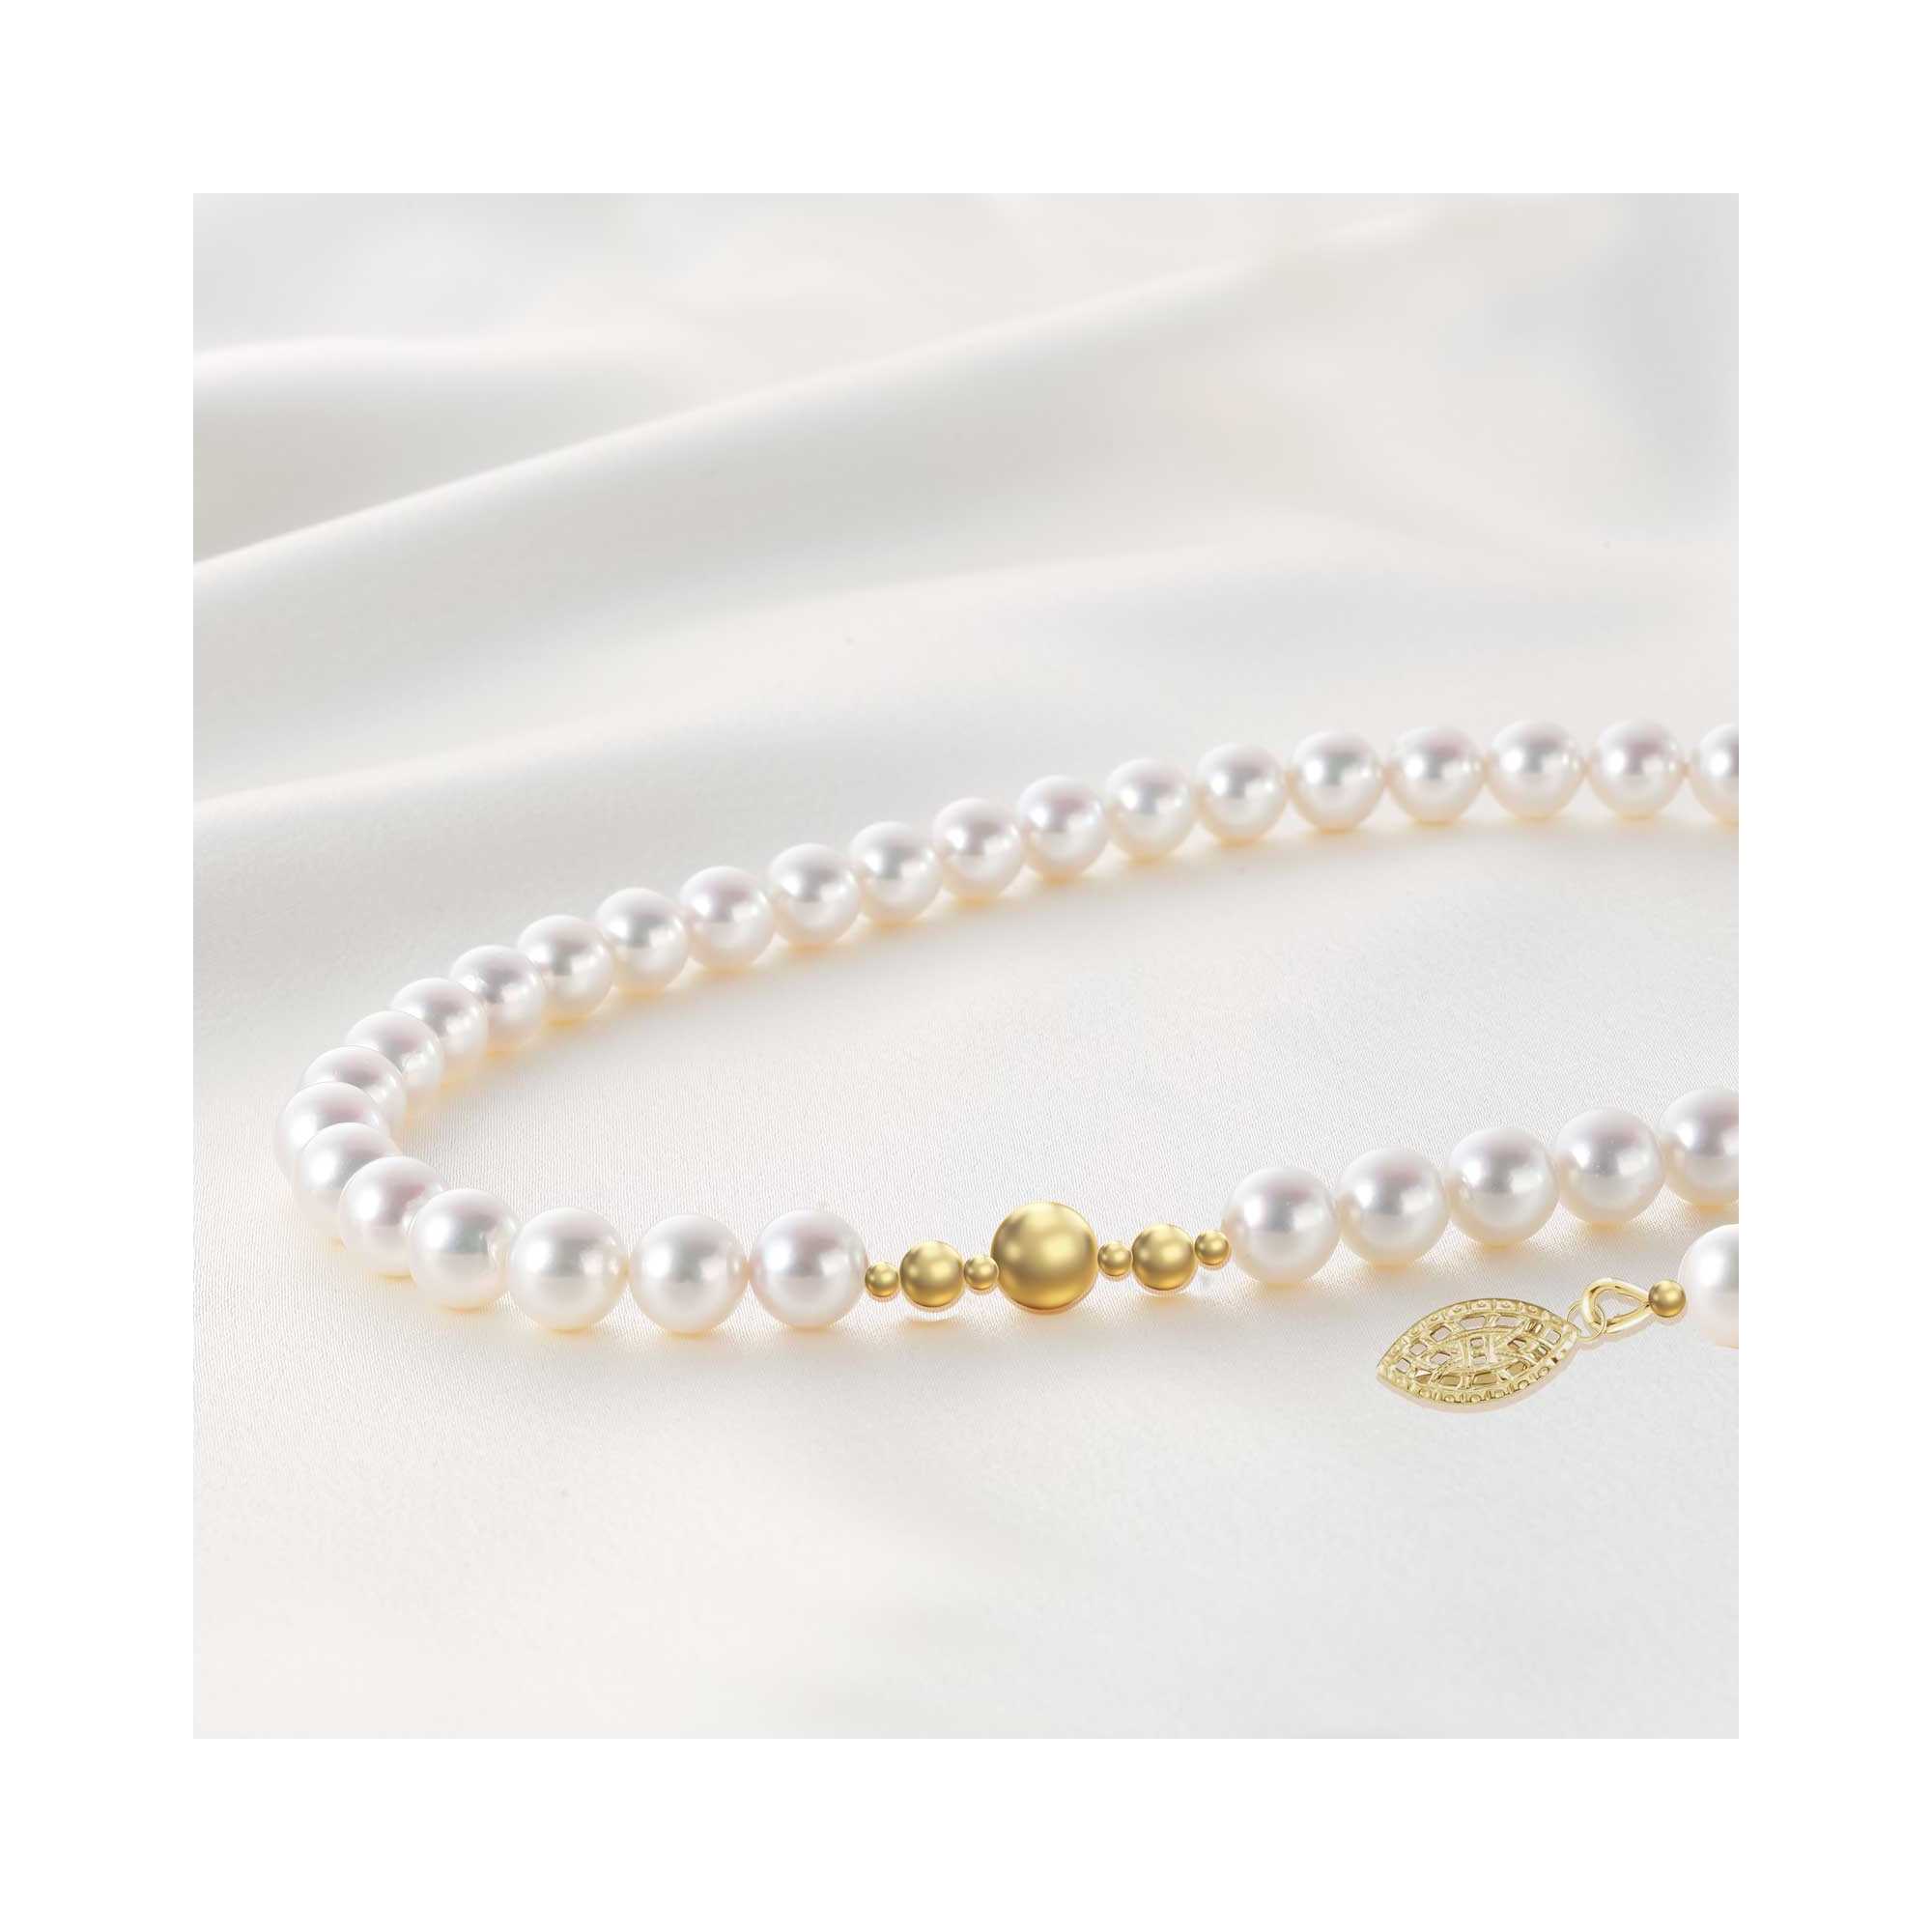 Freshwater cultured pearl and gold necklace- | Mali's Canadian Jewelry Fresh water cultured  pearl and 14 K gold Necklace
Neckla